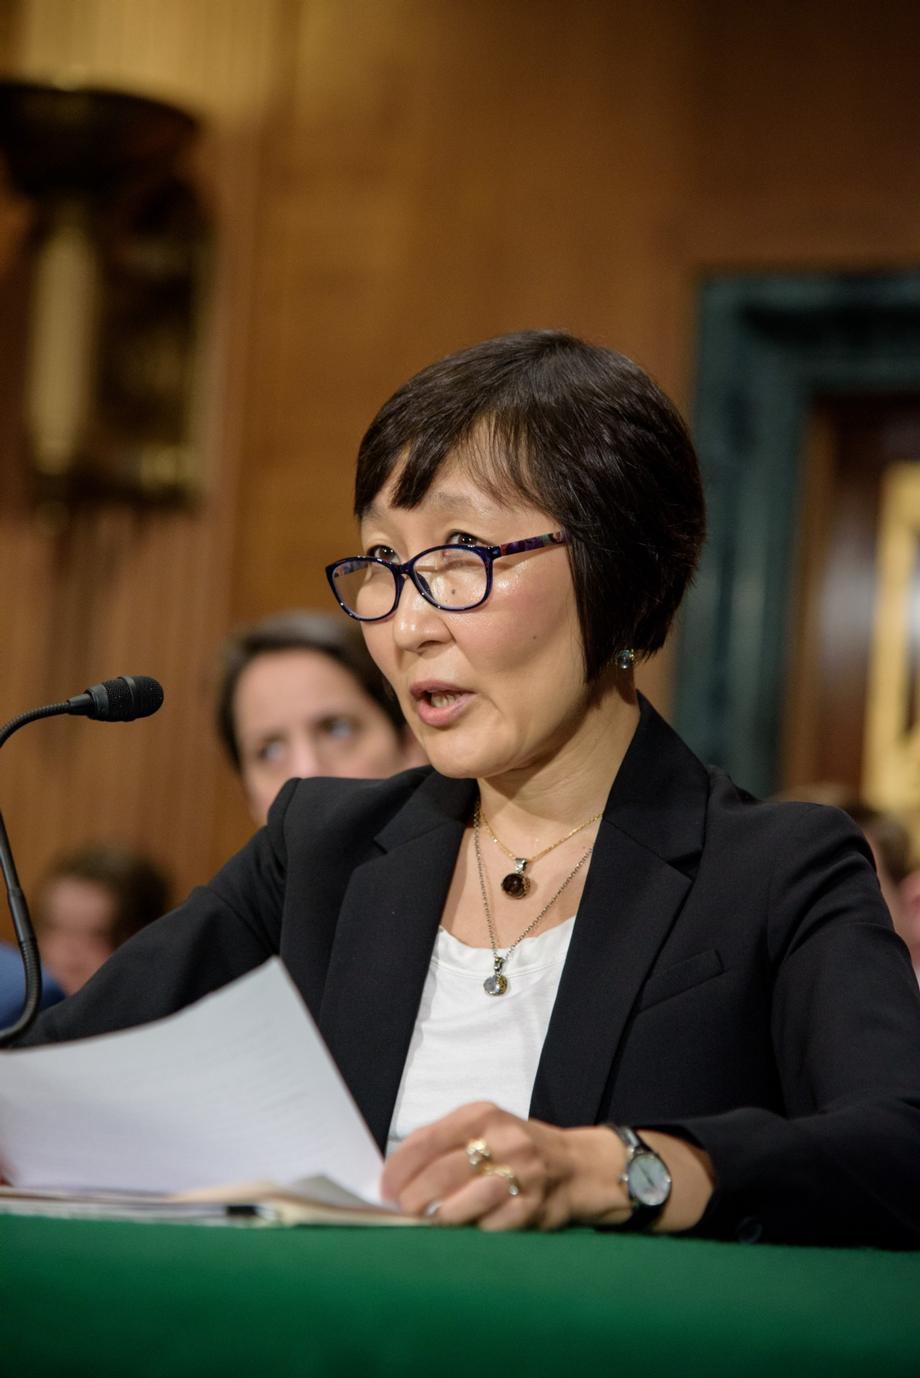 Saule Omarova during a September 2018 hearing by the Senate Committee on Banking, Housing, and Urban Affairs. (Courtesy Senate Committee)